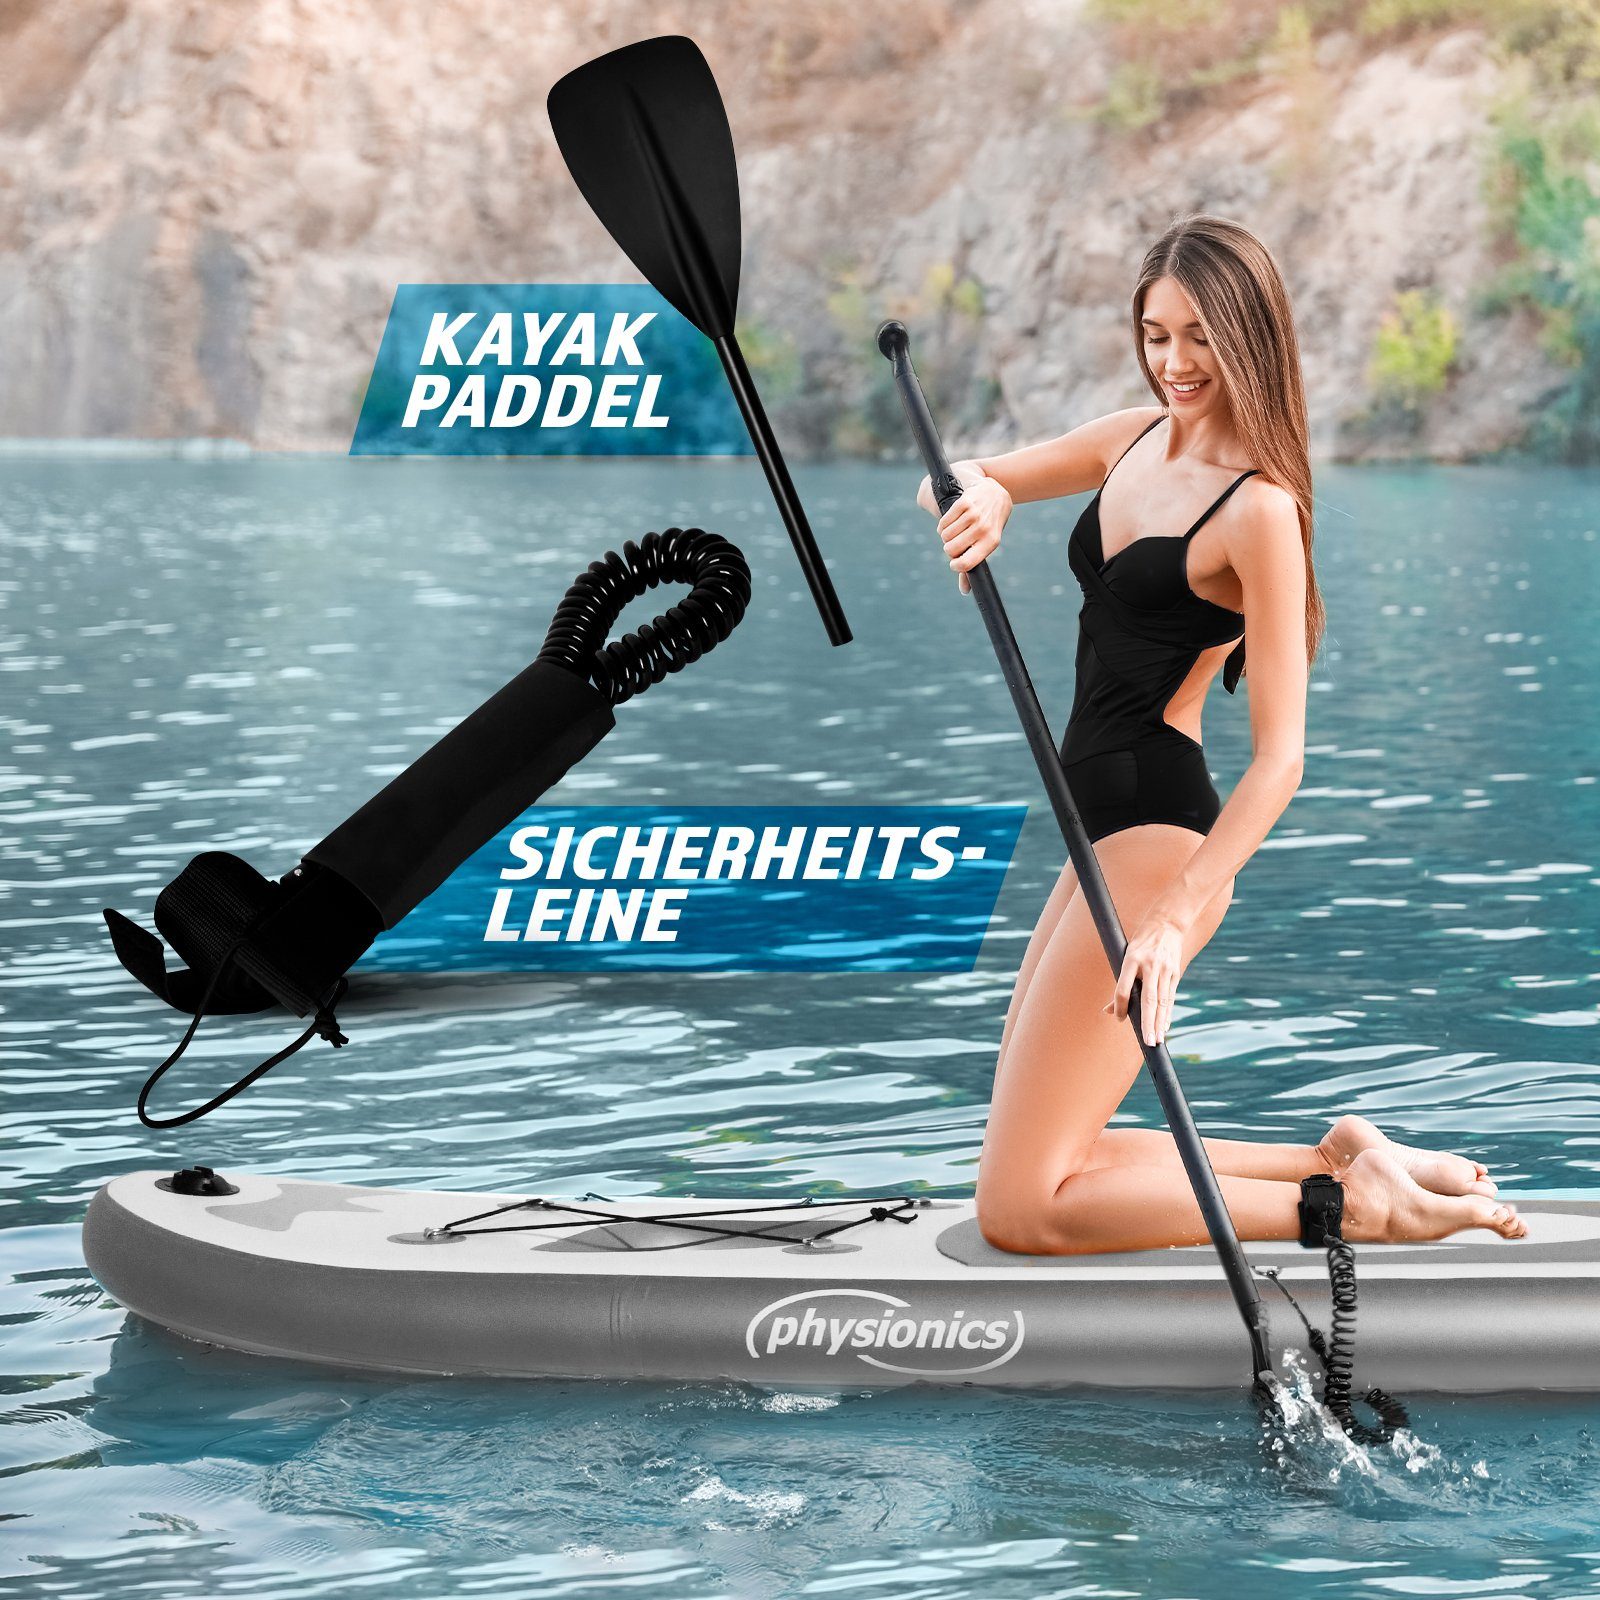 SUP Board Stand Paddle Anubis(Silber) Physionics Up Board 320cm Aufblasbares SUP-Board